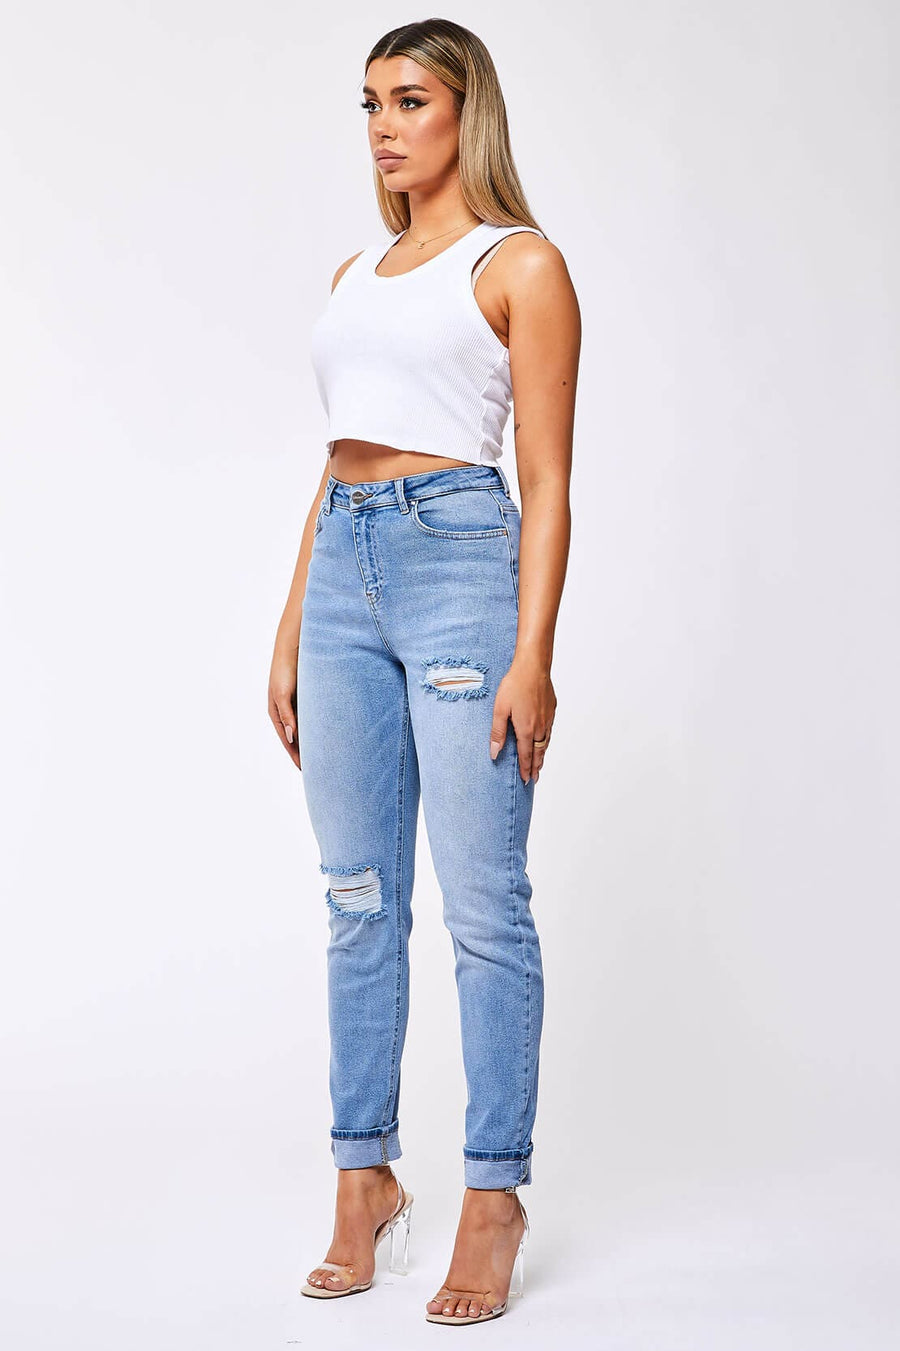 Legend London Jeans STRAIGHT LEG JEAN - WASHED BLUE RIPPED